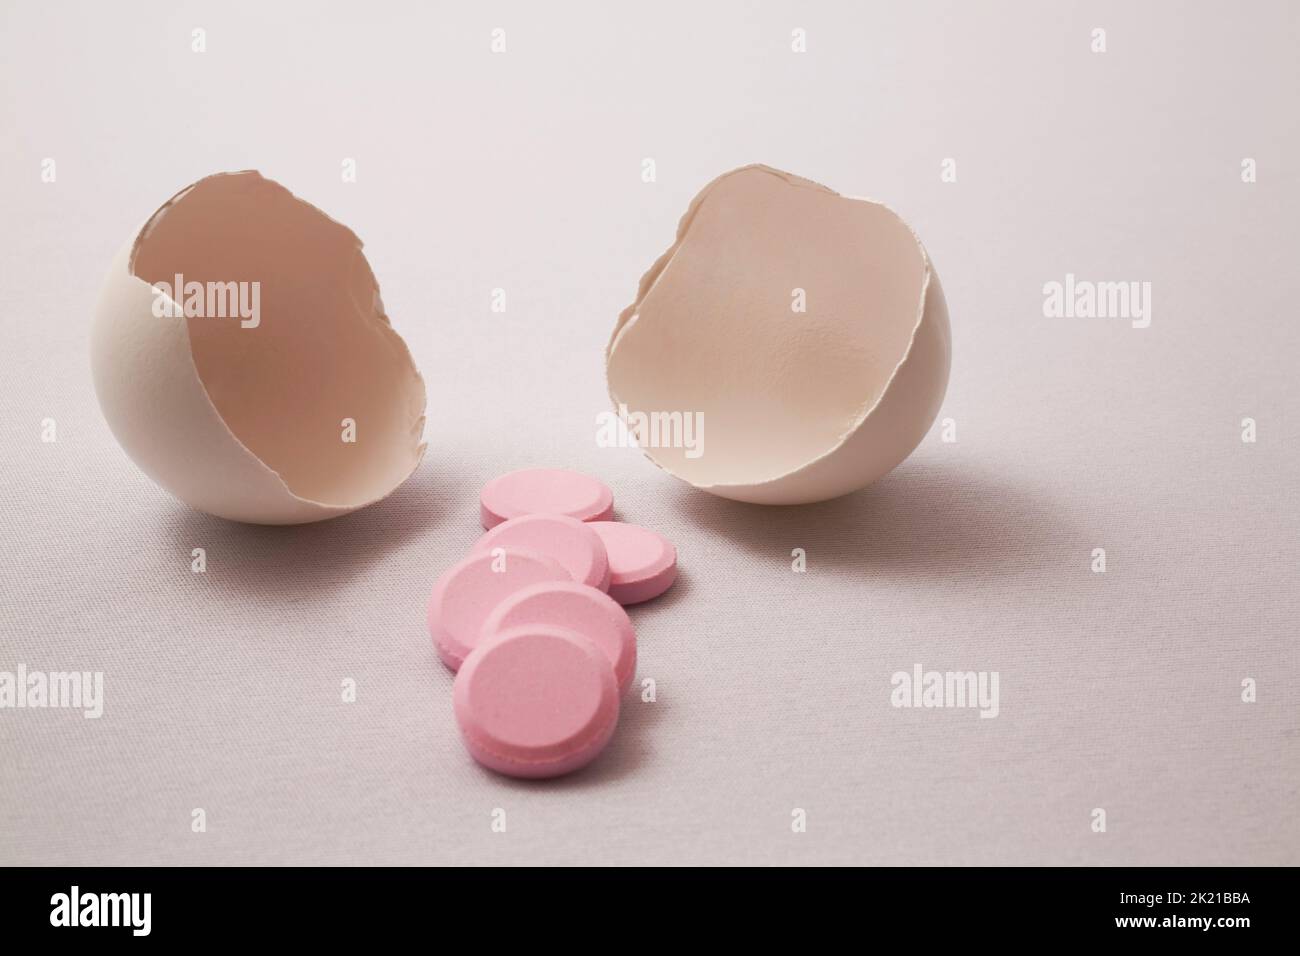 Close-up of cracked egg shells with pink medicine pills on light gray background. Stock Photo